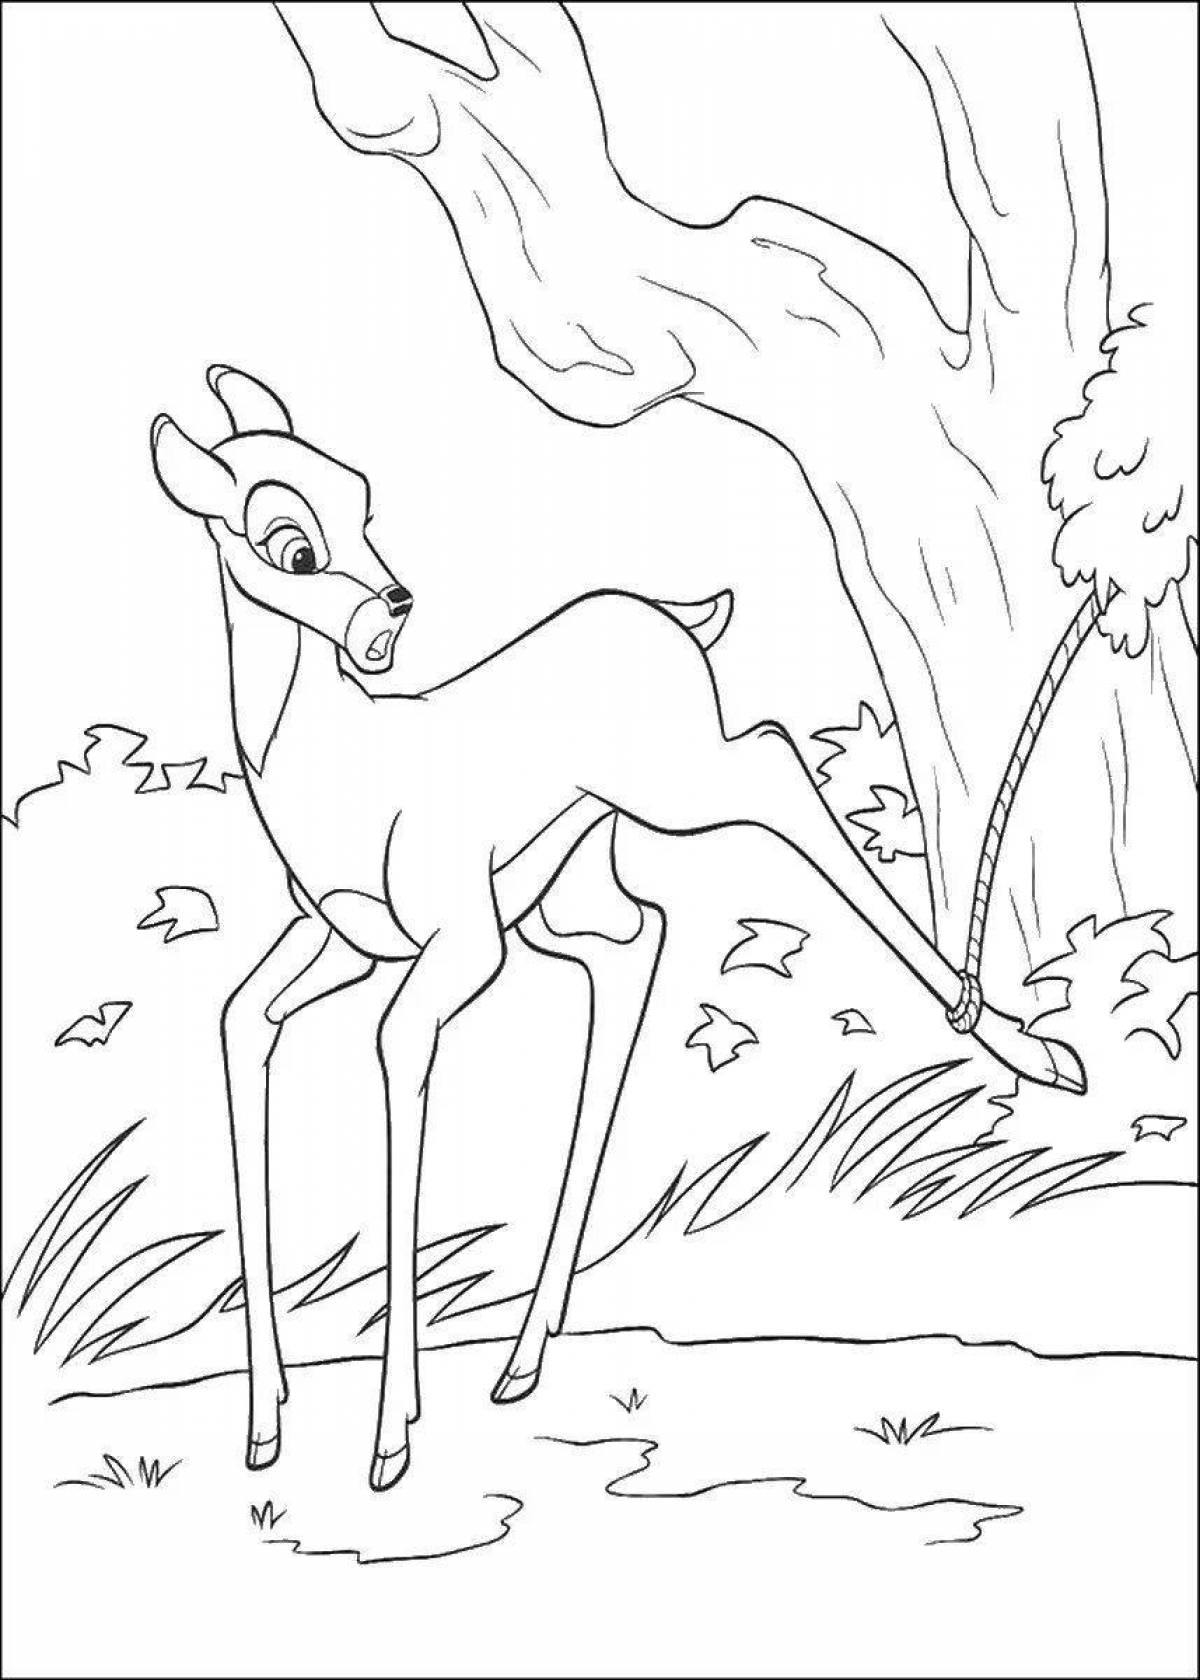 Coloring page adorable bambi 2